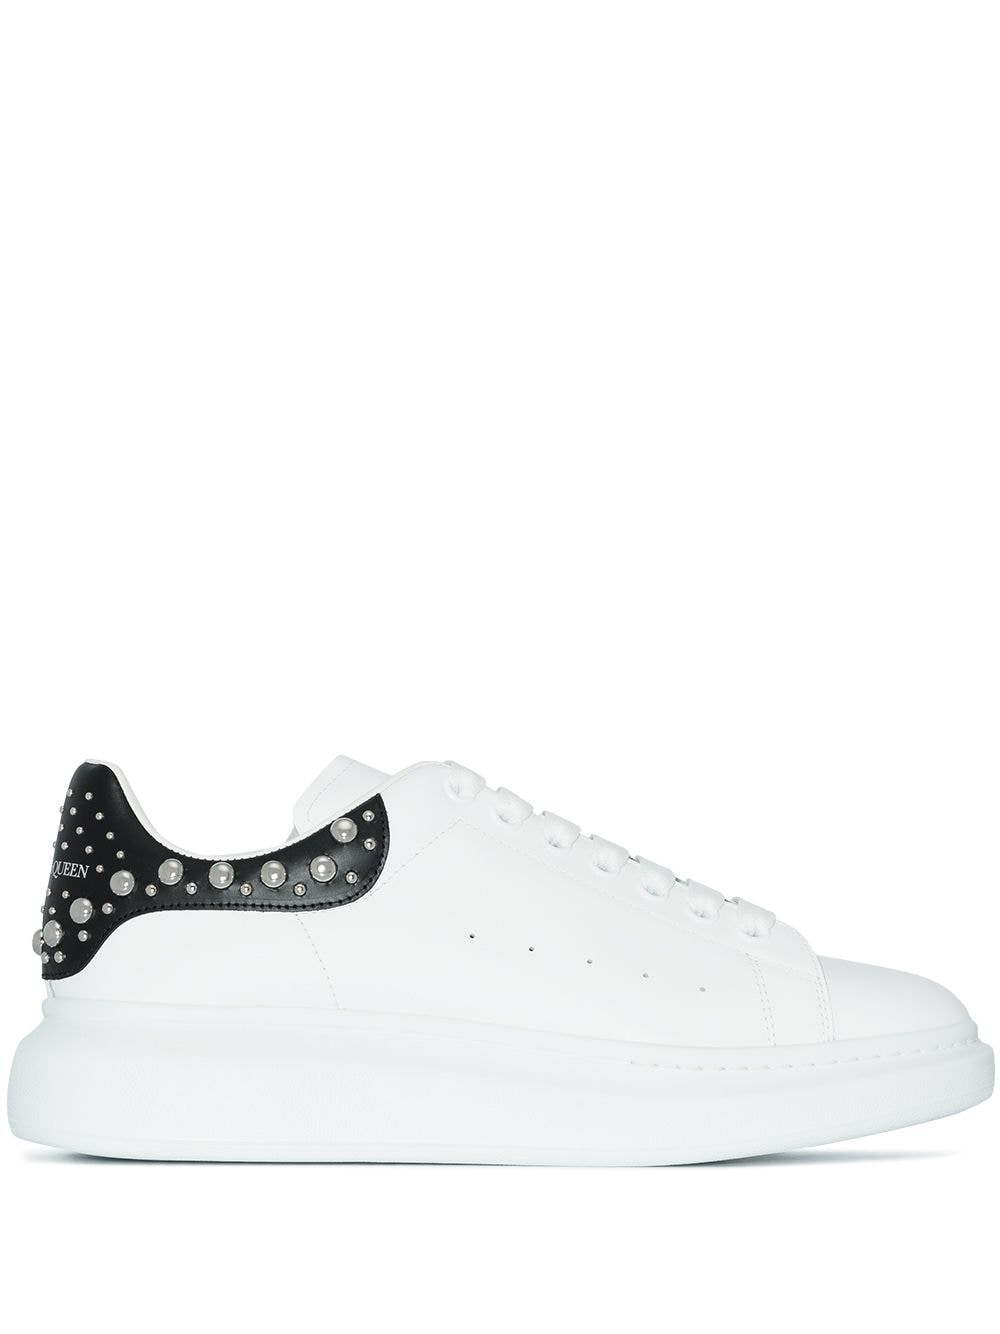 ALEXANDER MCQUEEN Oversized Pearl Embellished Sneakers White - MAISONDEFASHION.COM